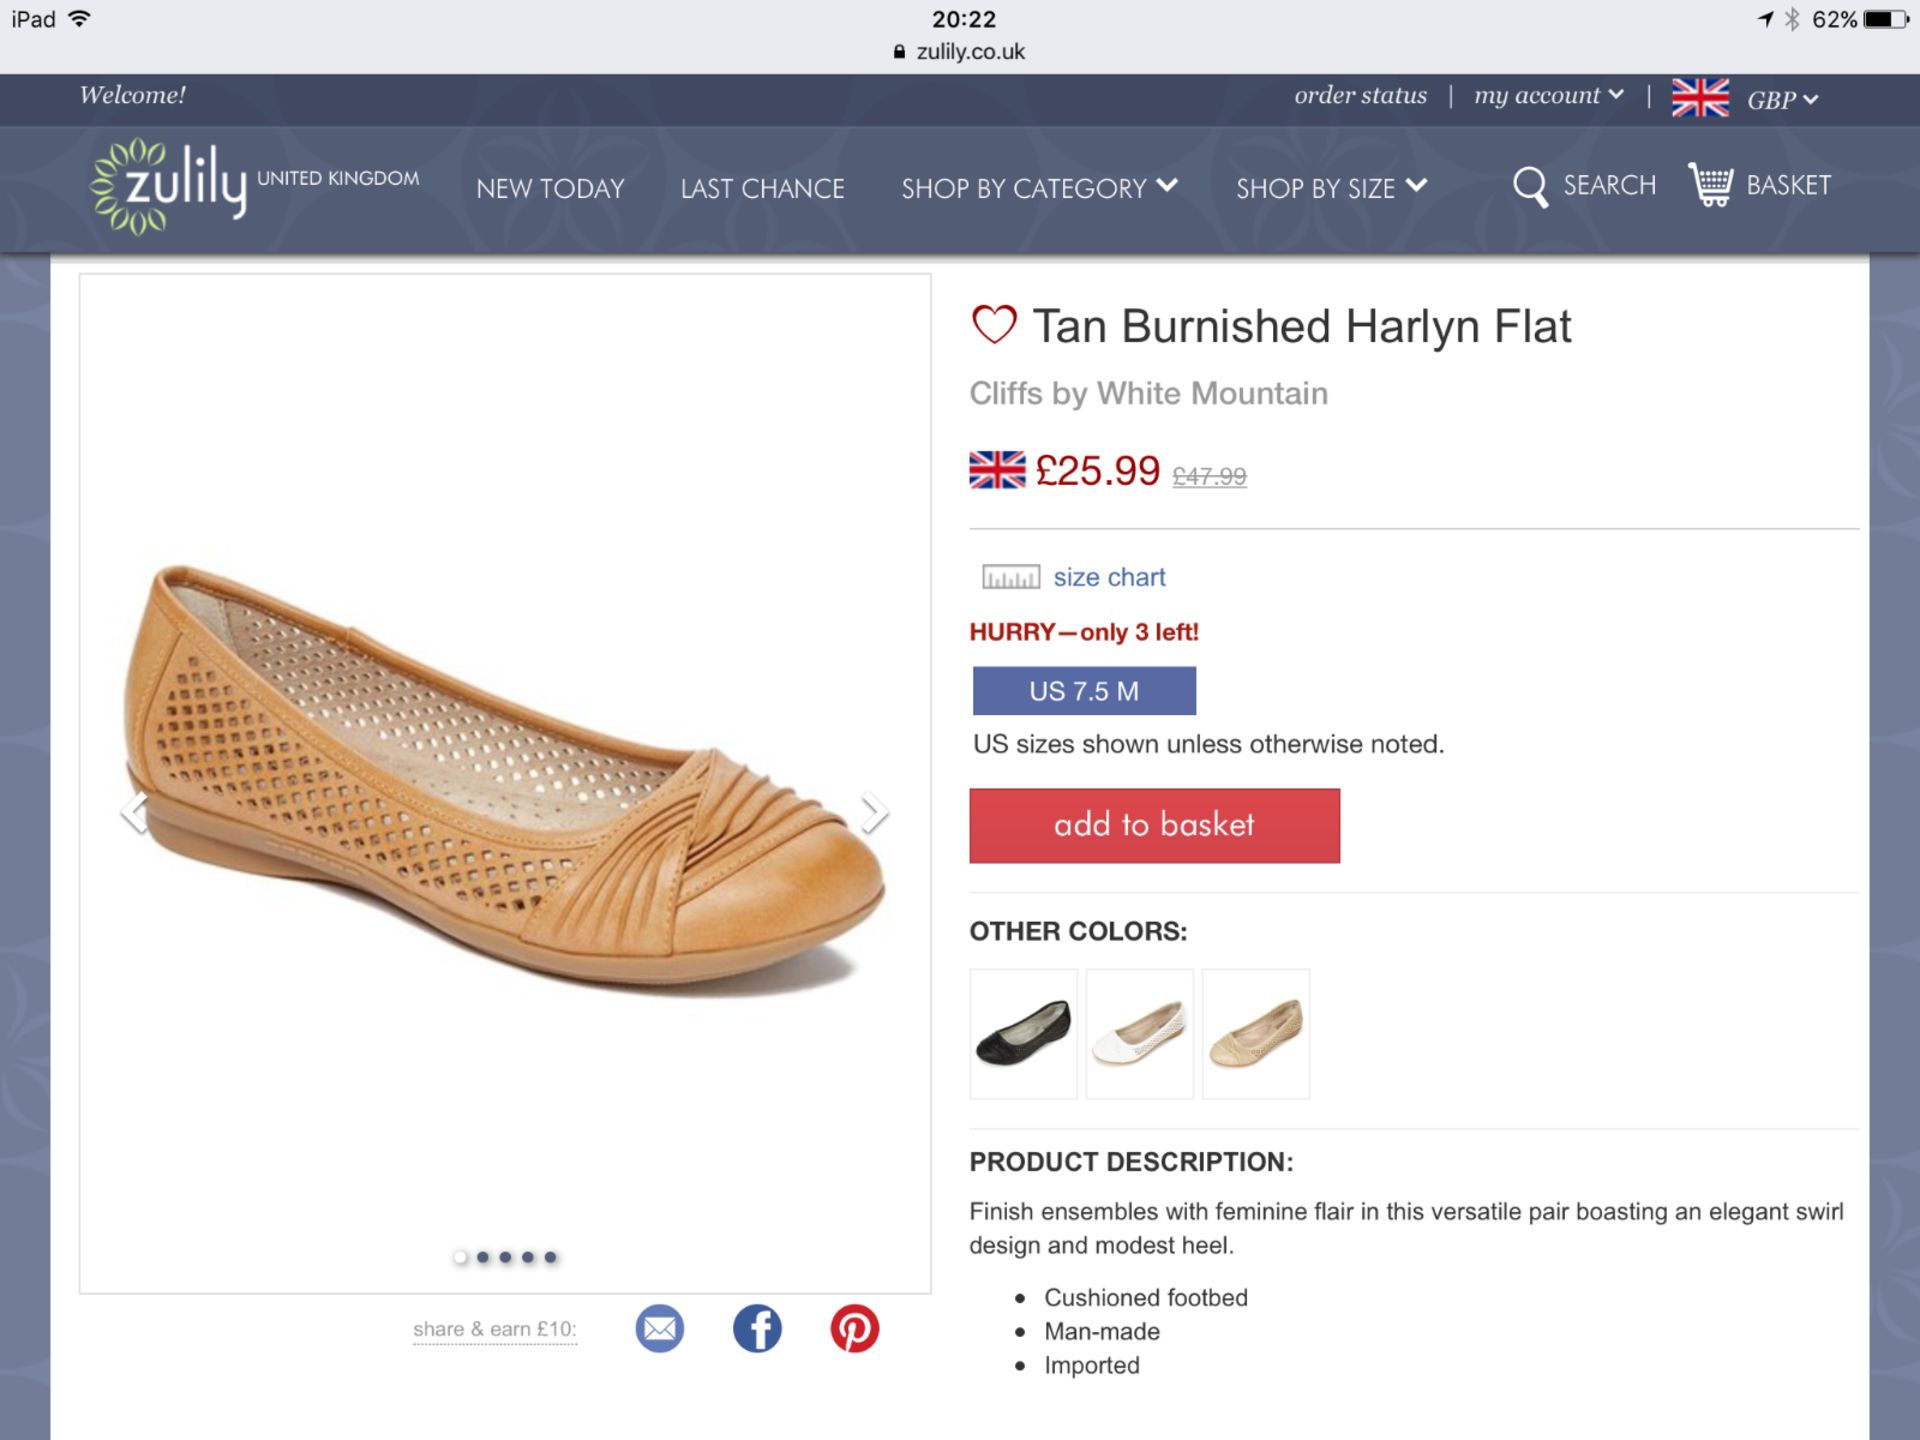 Cliffs by White Mountain Tan Burnished Harlyn Flat, Size US 7 UK 5 (New with box) [Ref: 46173220- - Image 6 of 7